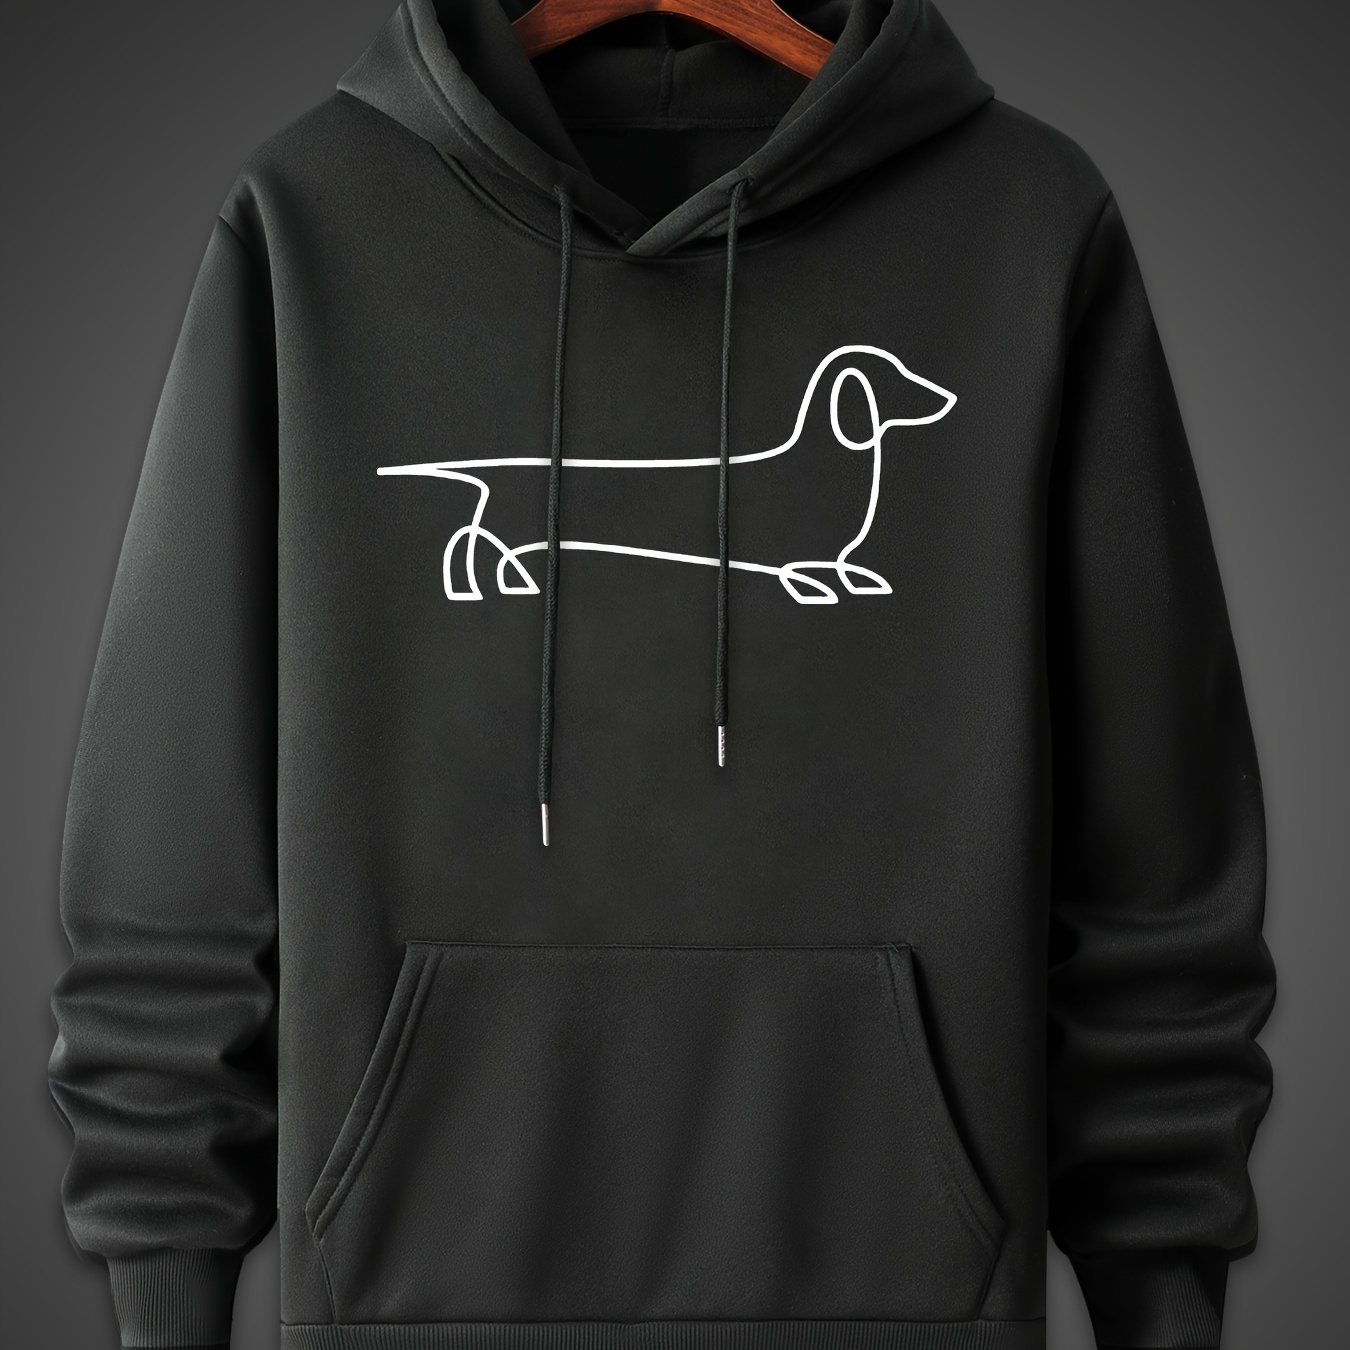 

Dog Sketch Pattern, Men's Trendy Comfy Hoodie, Casual Slightly Stretch Breathable Hooded Sweatshirt For Outdoor